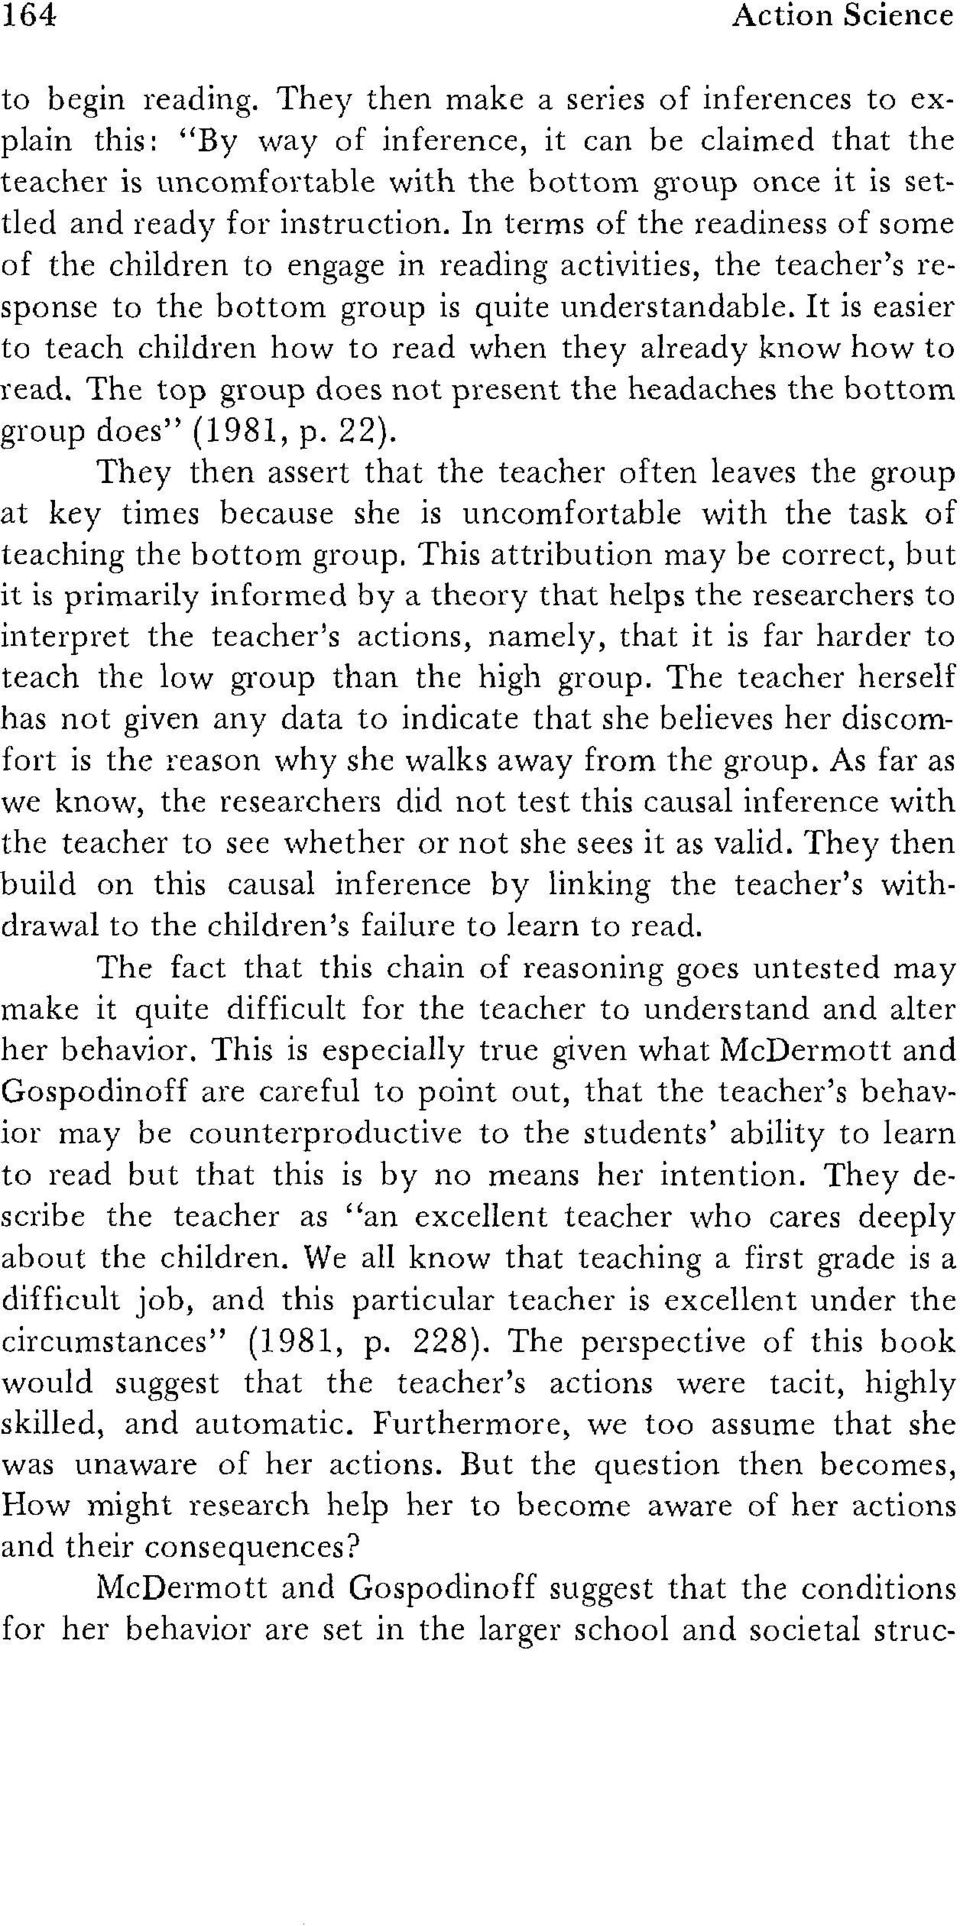 inference, it can be claimed that the teacher is uncomfortable with